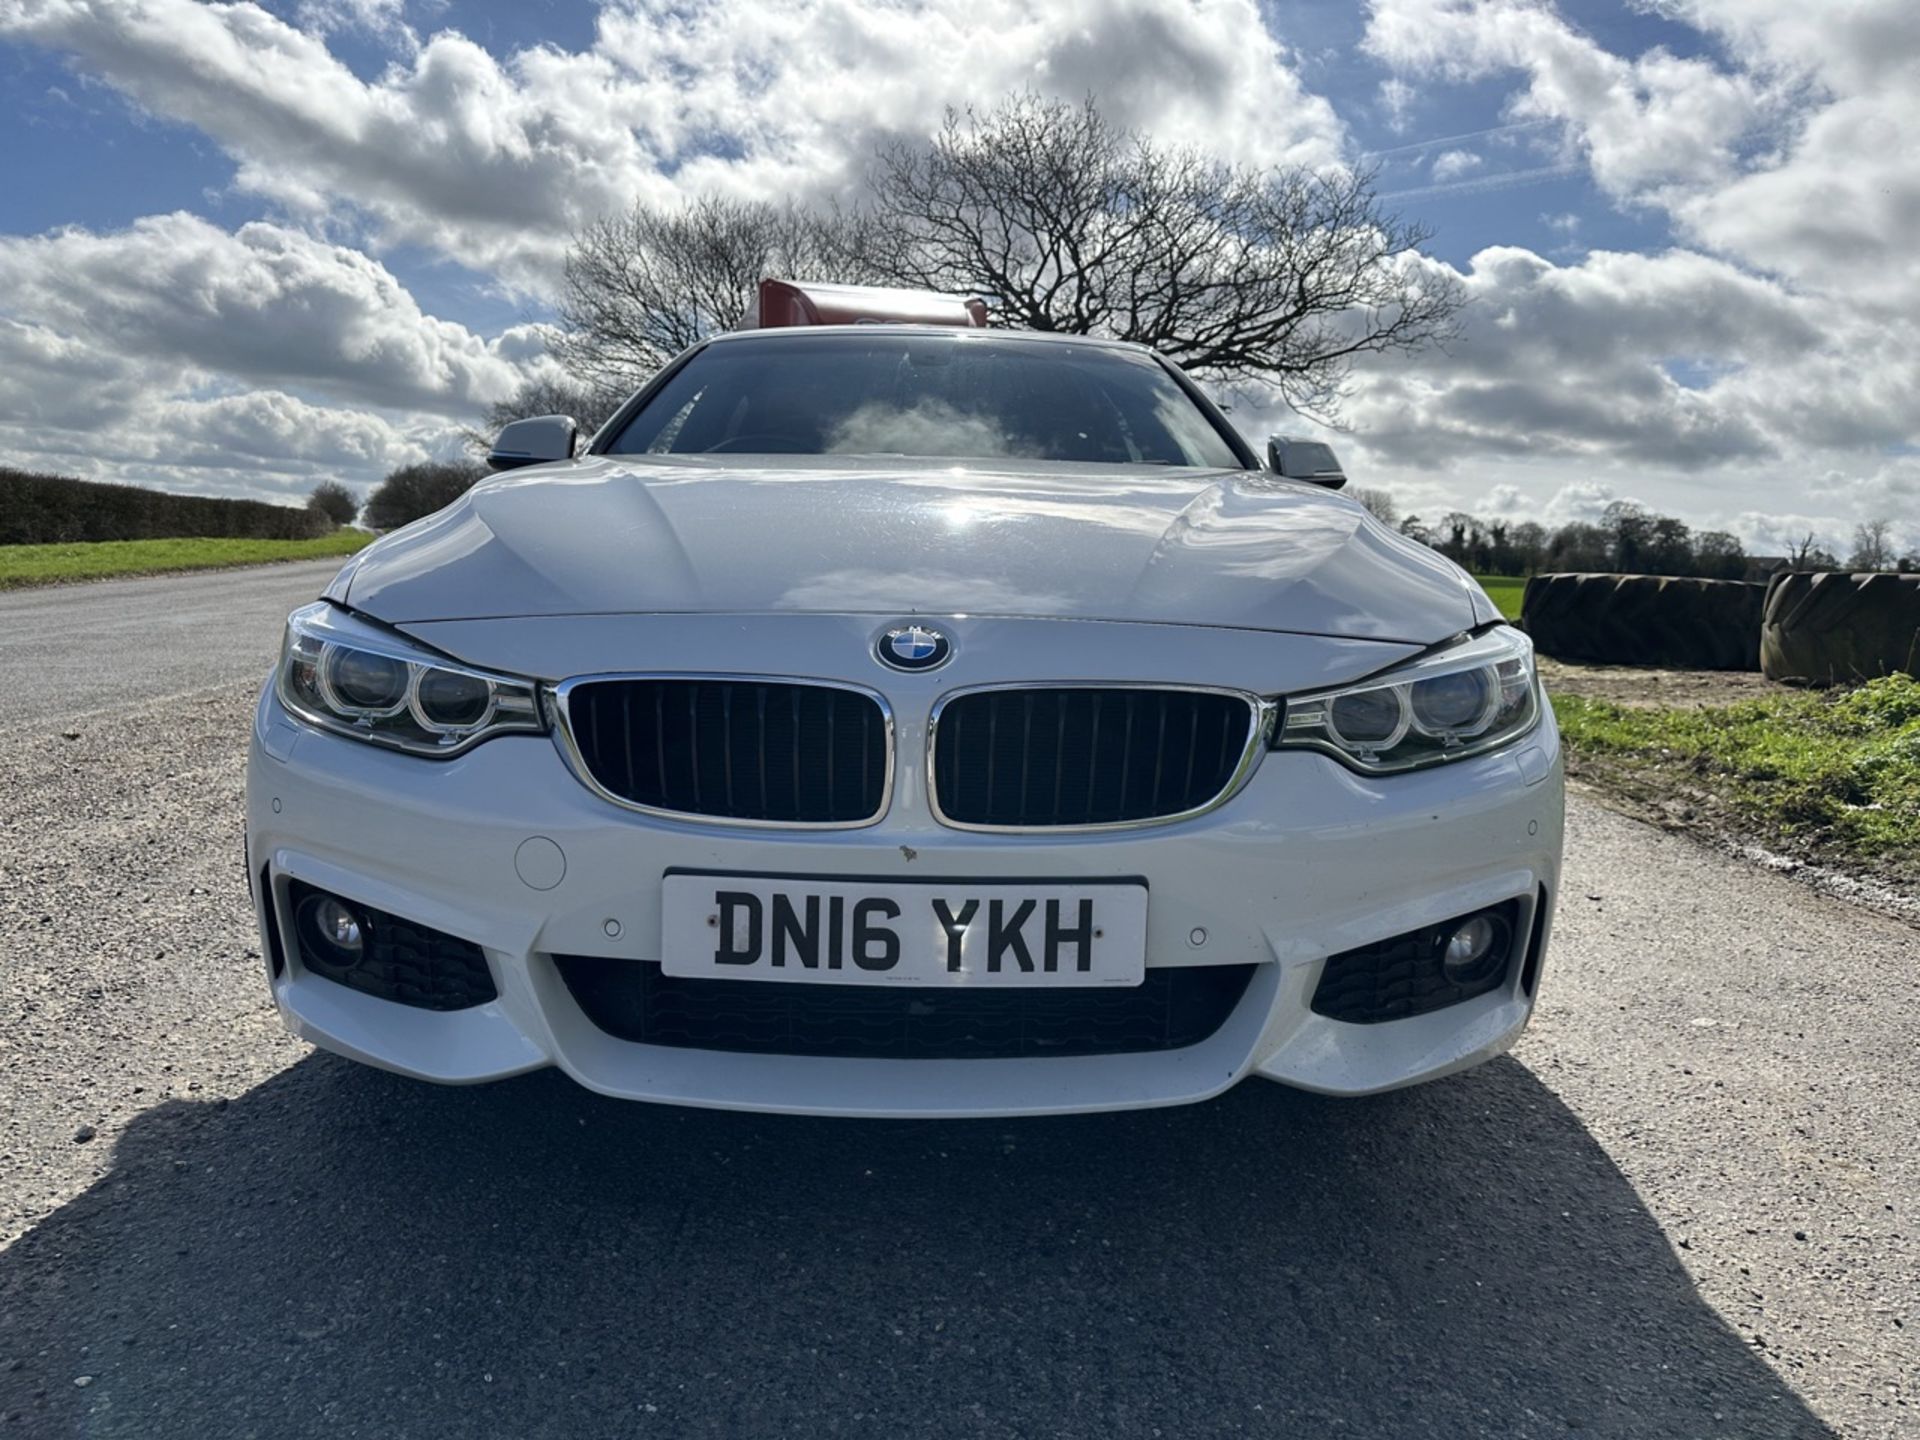 BMW 4 SERIES 420i M Sport 5dr [Professional Media] Manual - Petrol - 2.0 - Coupe- 54k miles - 2016 - Image 7 of 22